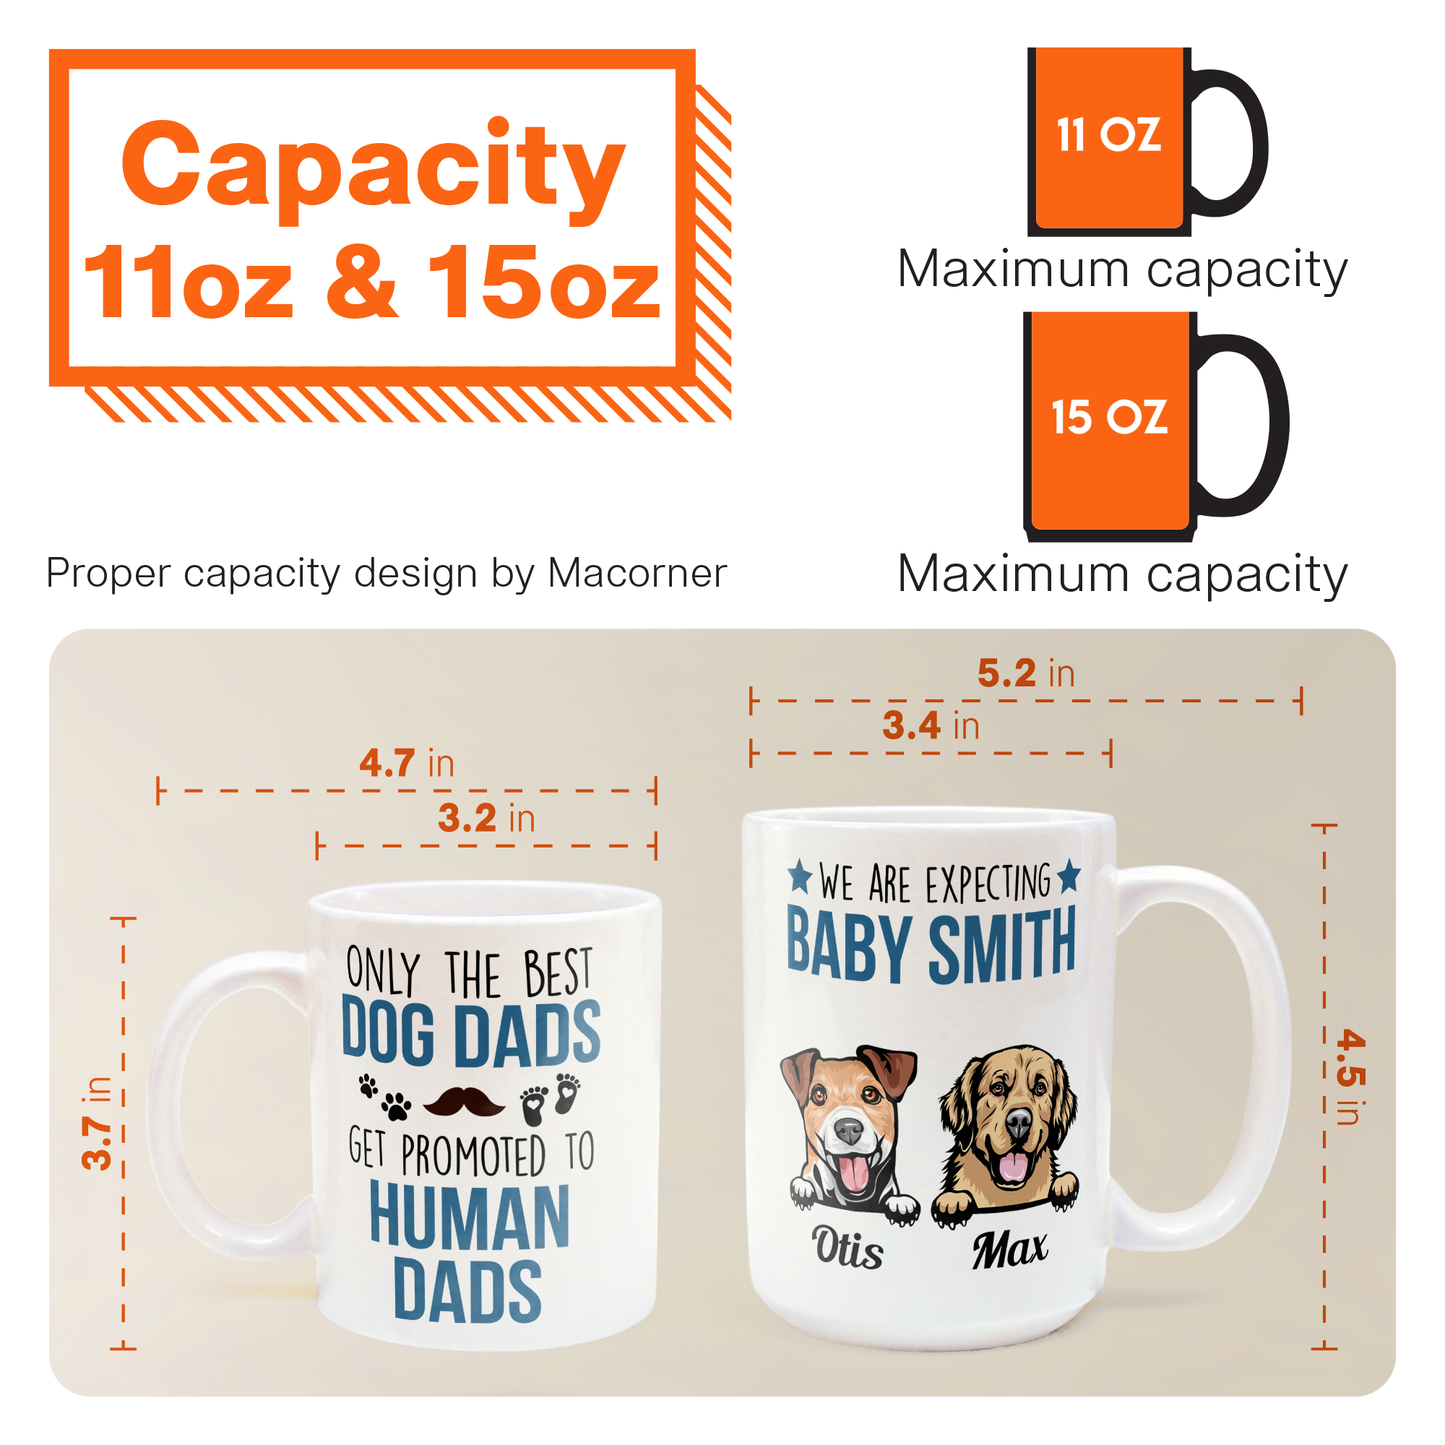 Only The Best Dog Dads Get Promoted To Human Dads - Personalized Mug - Birthday, Pregnancy Announcement, Father's Day Gift For Father, Daddy, Dad, Dog & Cat Lover